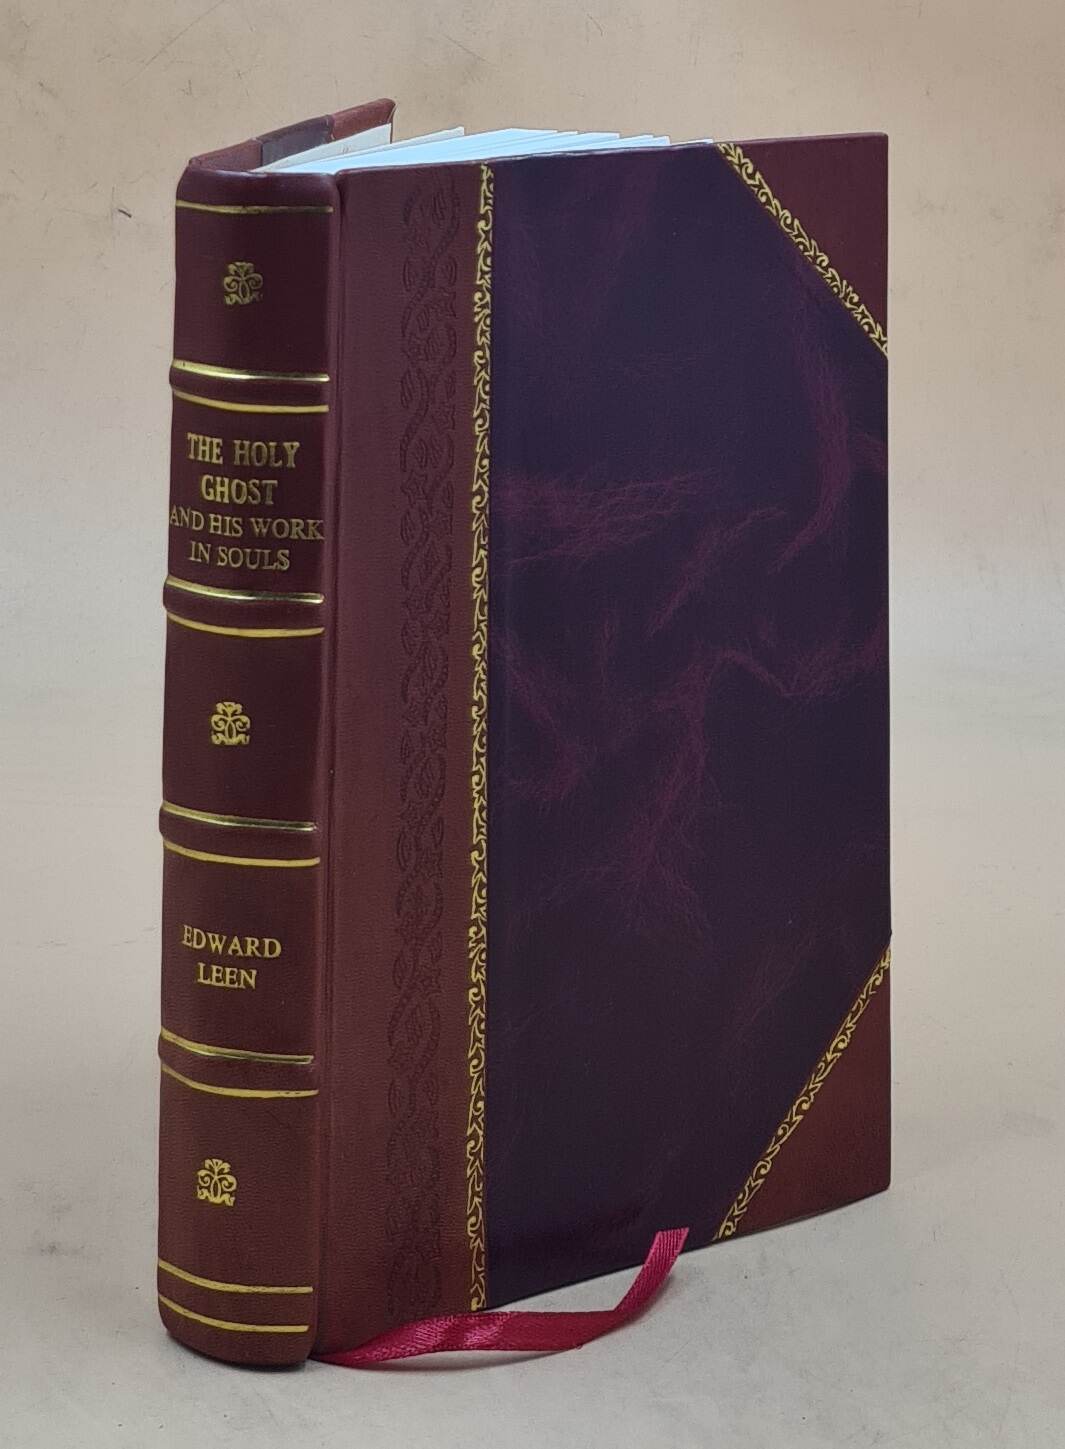 Primary image for The Holy ghost and his work in souls 1937 [Leather Bound] by Edward Leen